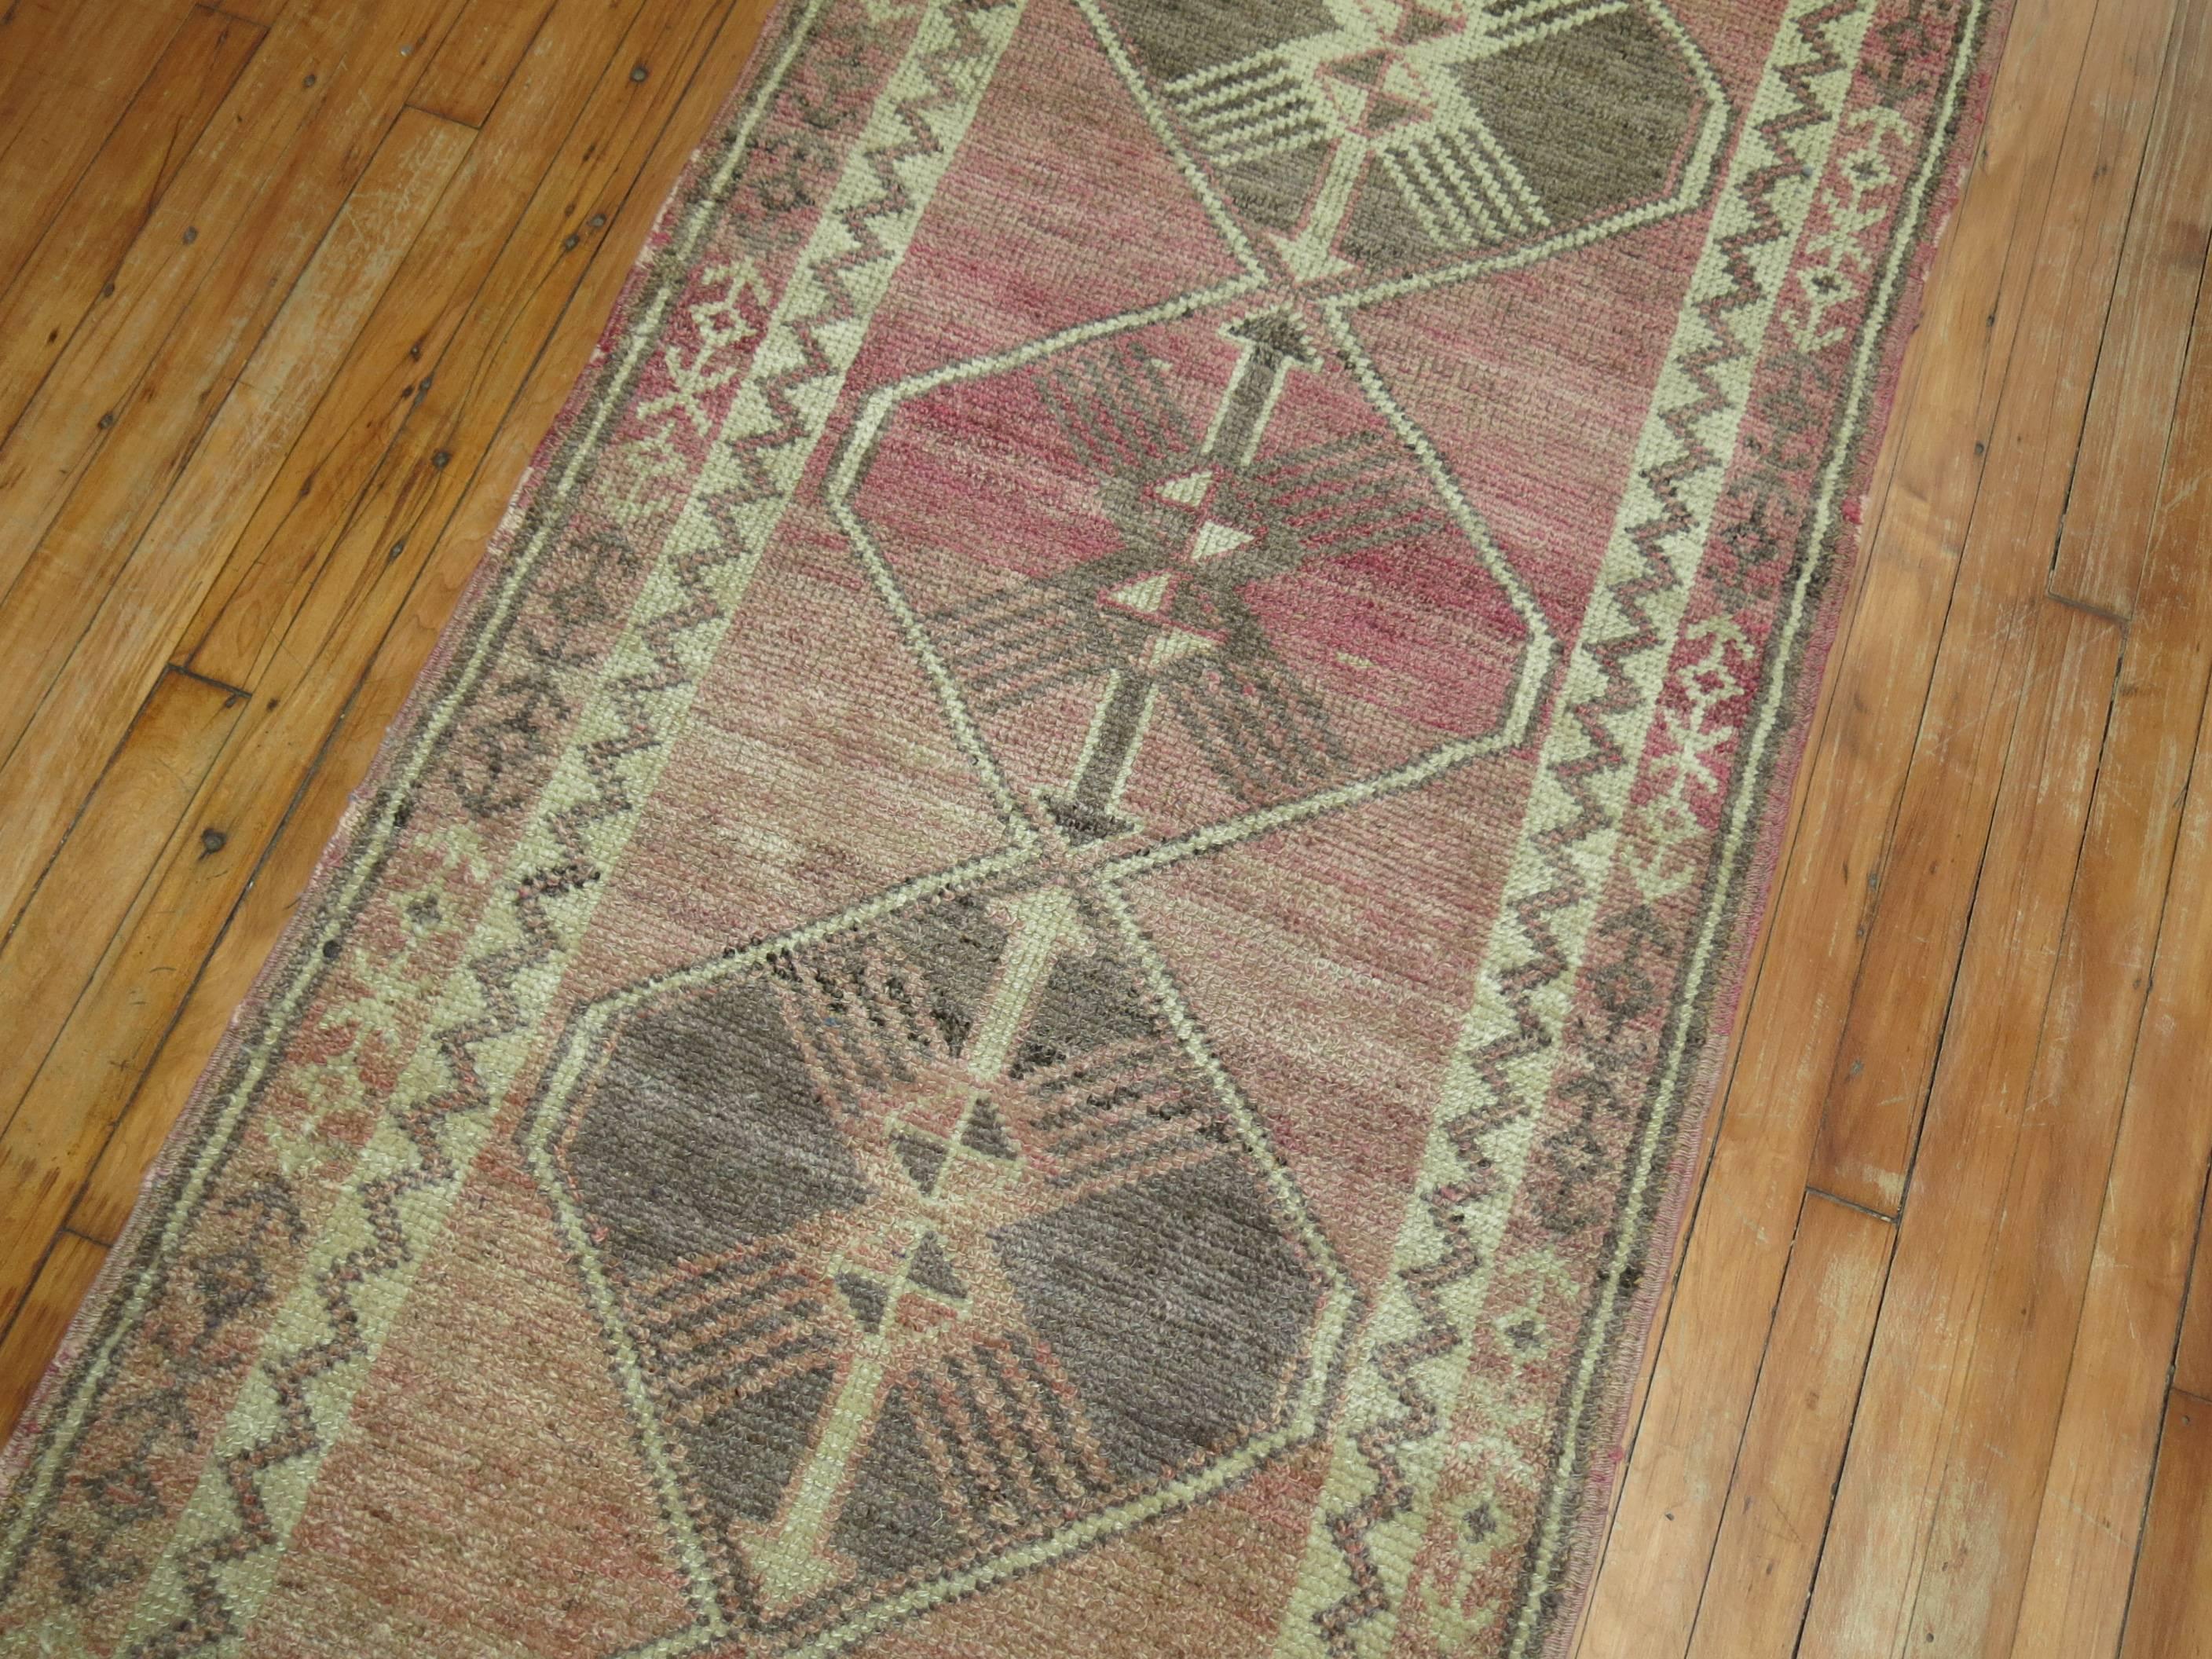 Vintage Turkish runner woven in Central Turkey in shades of pink and brown.

Measures: 29